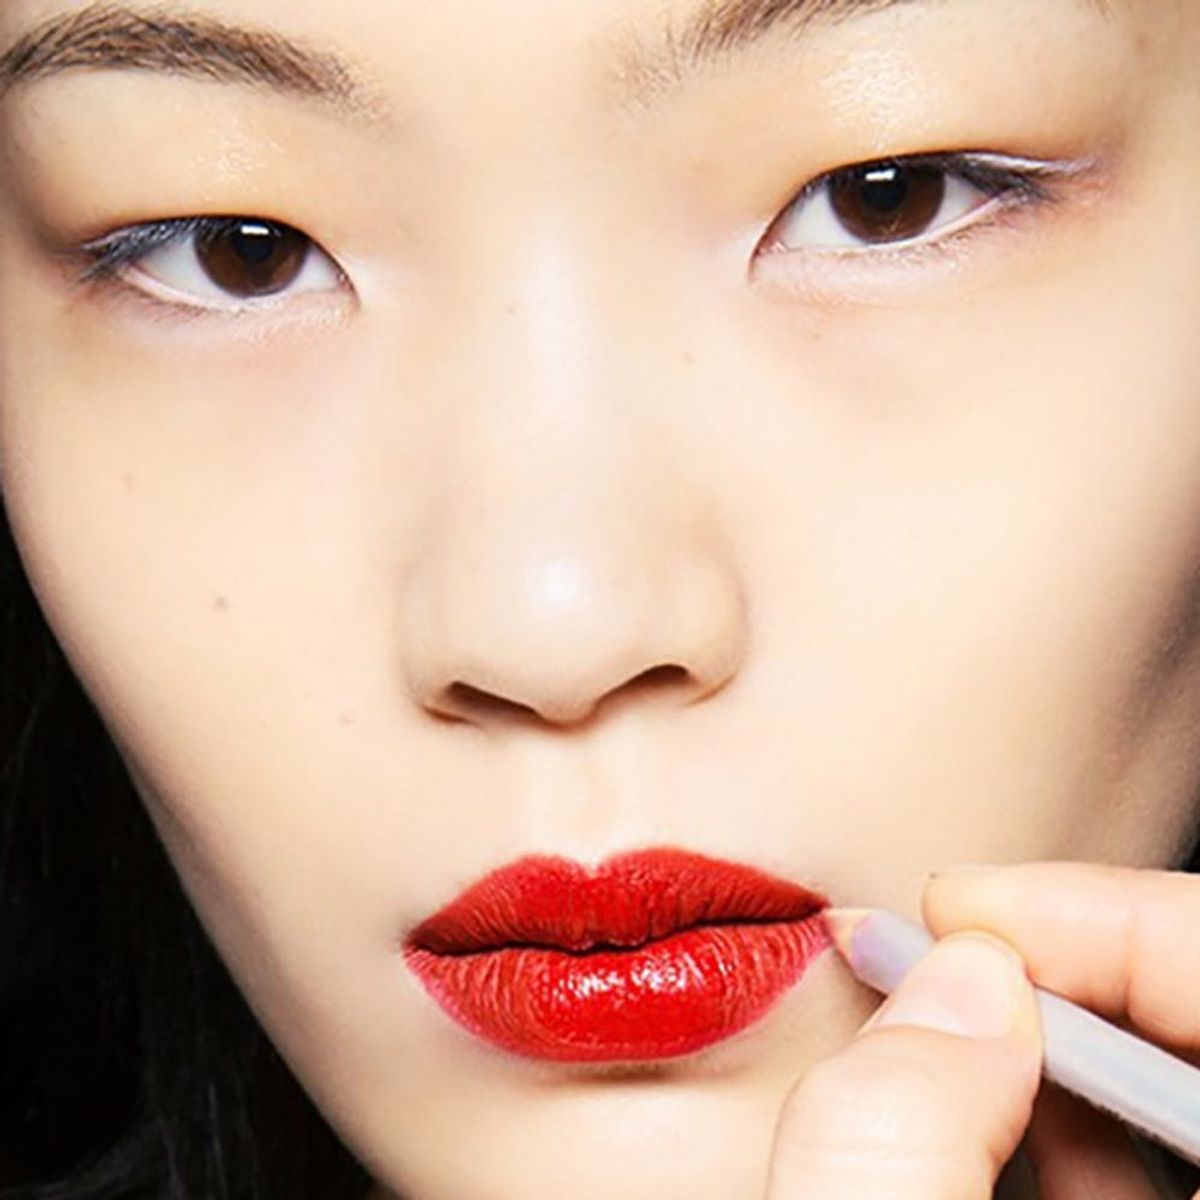 11 of the Most Common Makeup Mistakes — and How to Fix Them